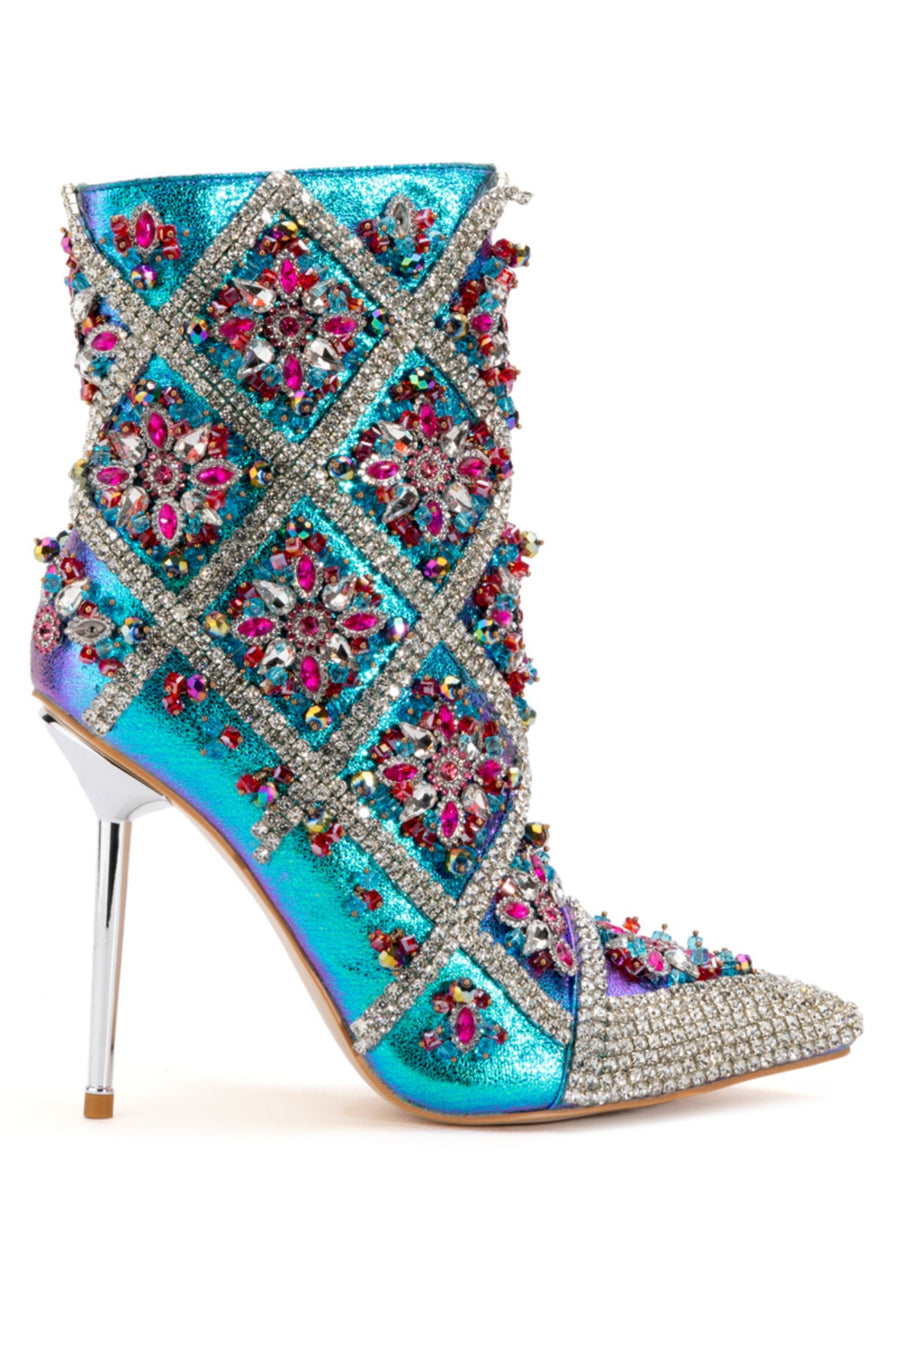 metallic blue pointed toe heeled boot with pink rhinestone flower detail